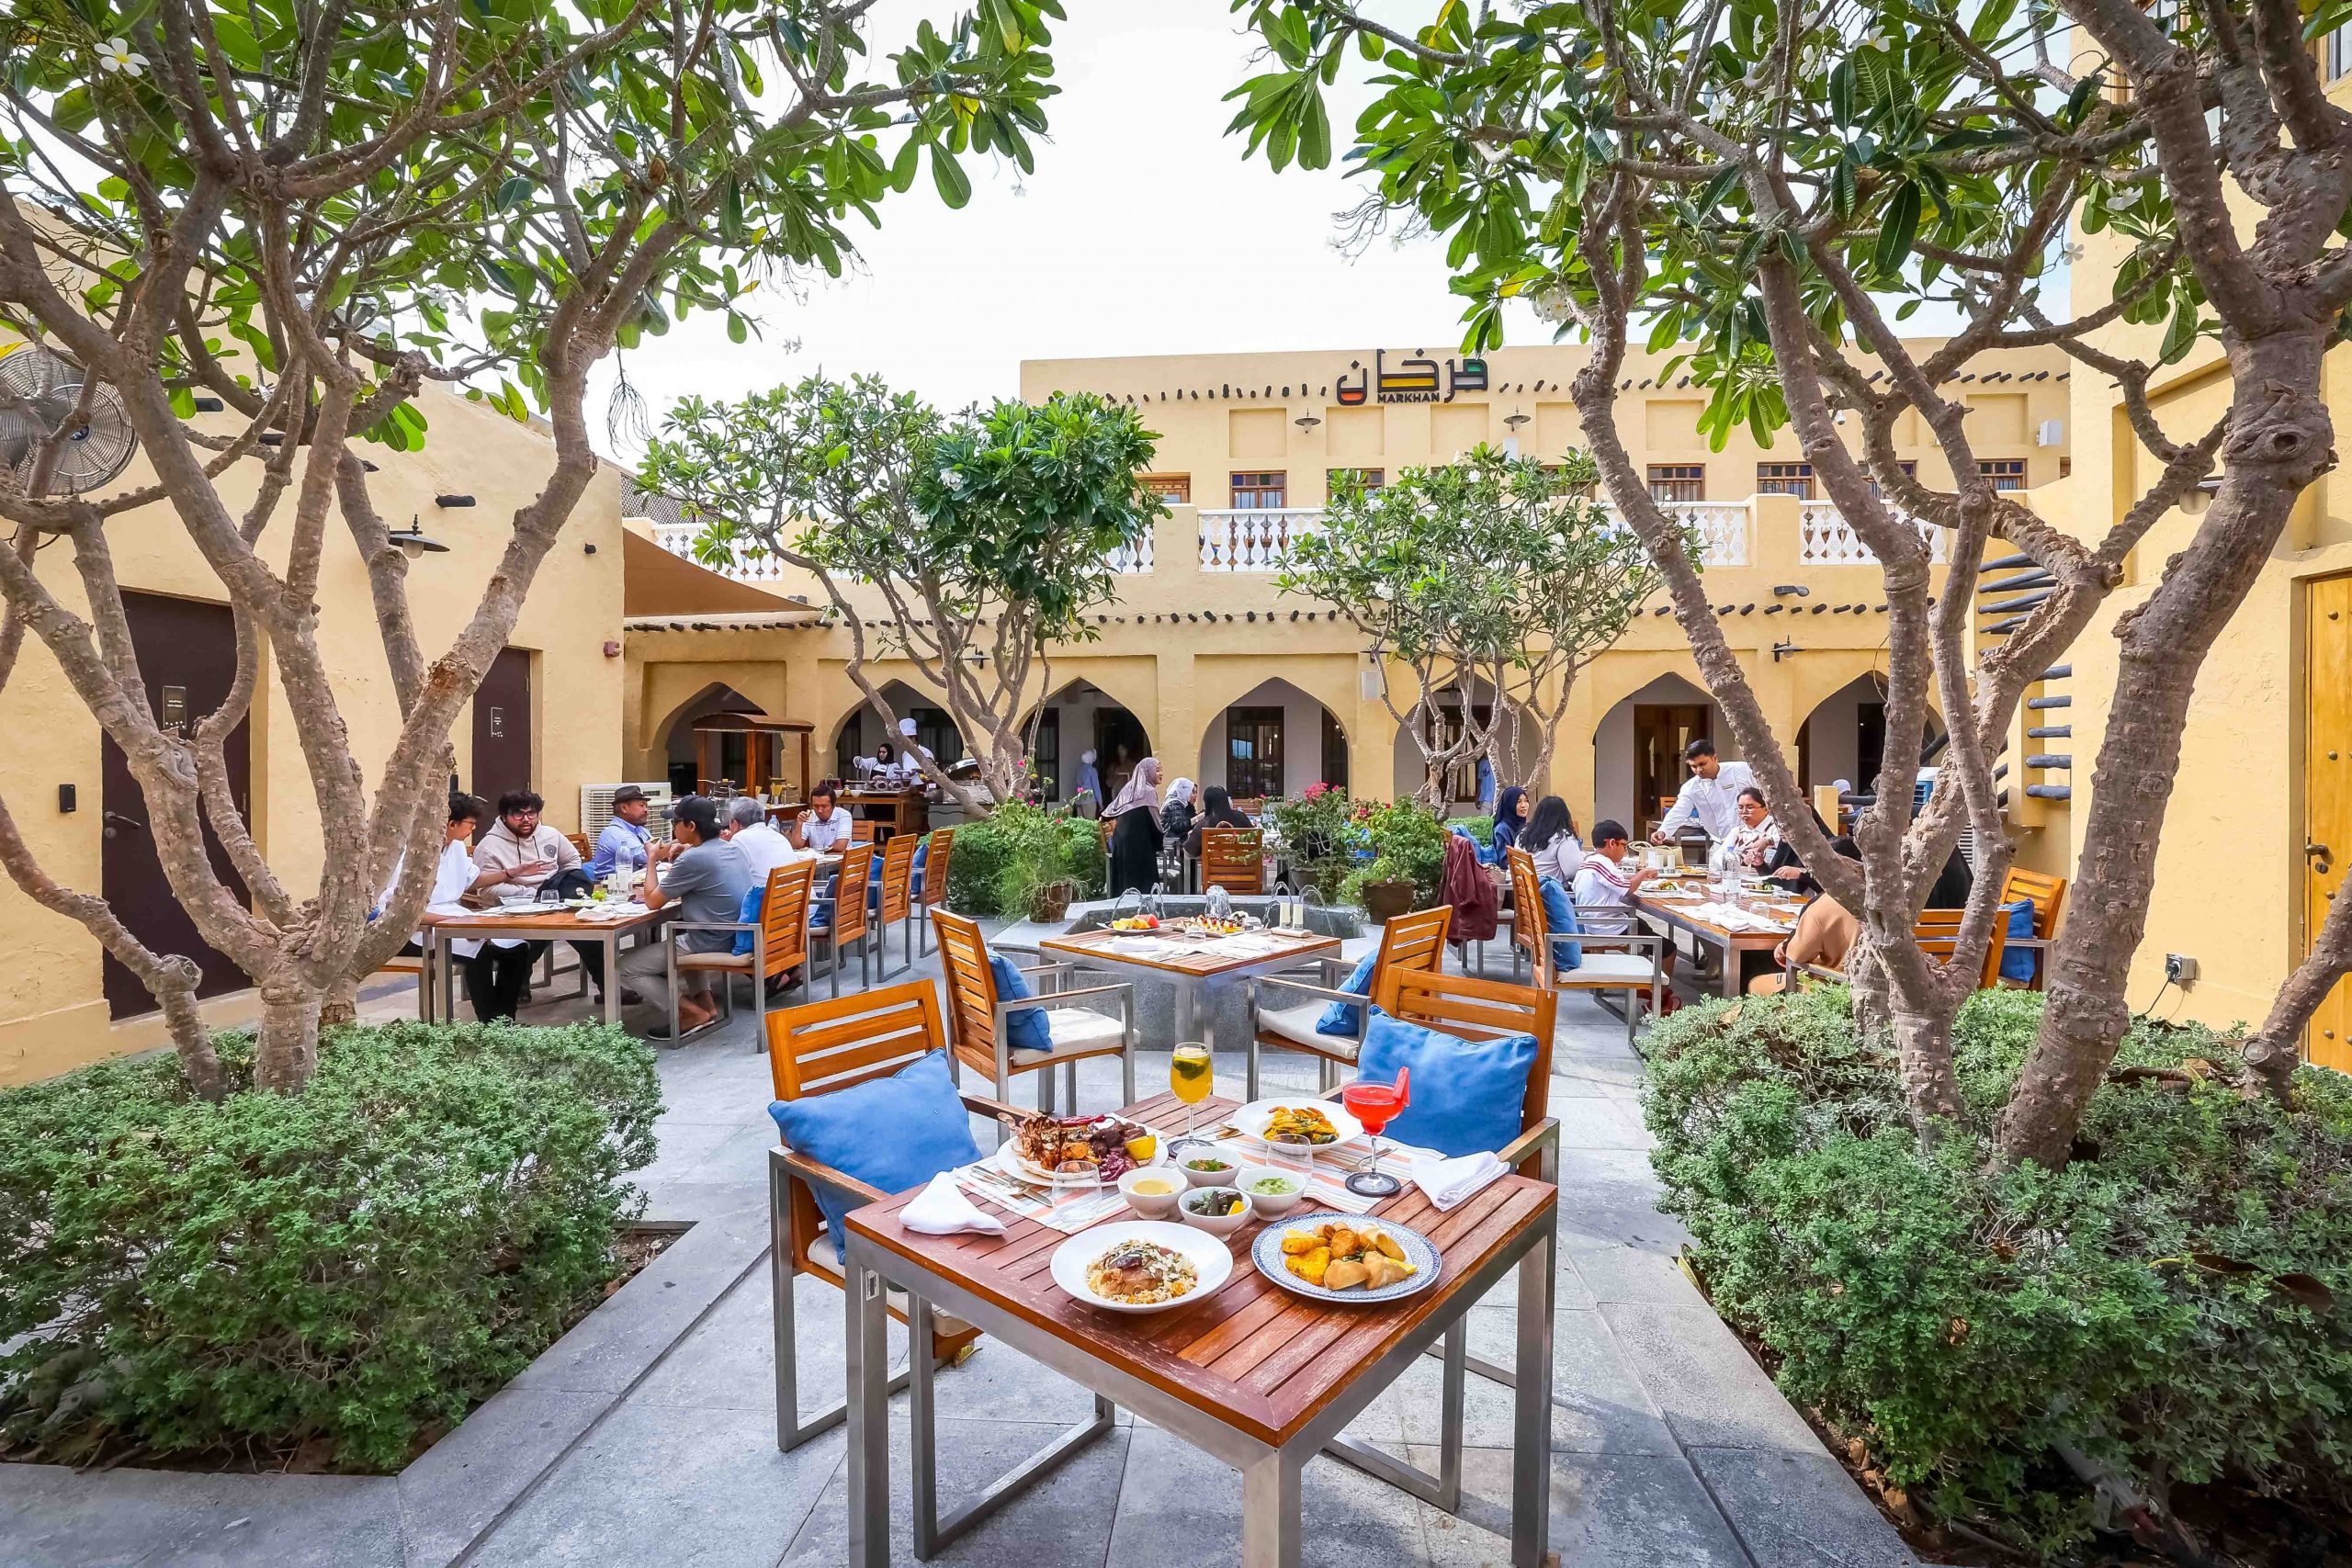 Souq Al Wakra Hotel Brunch Offers Weekend Delights with a Fusion of Flavours